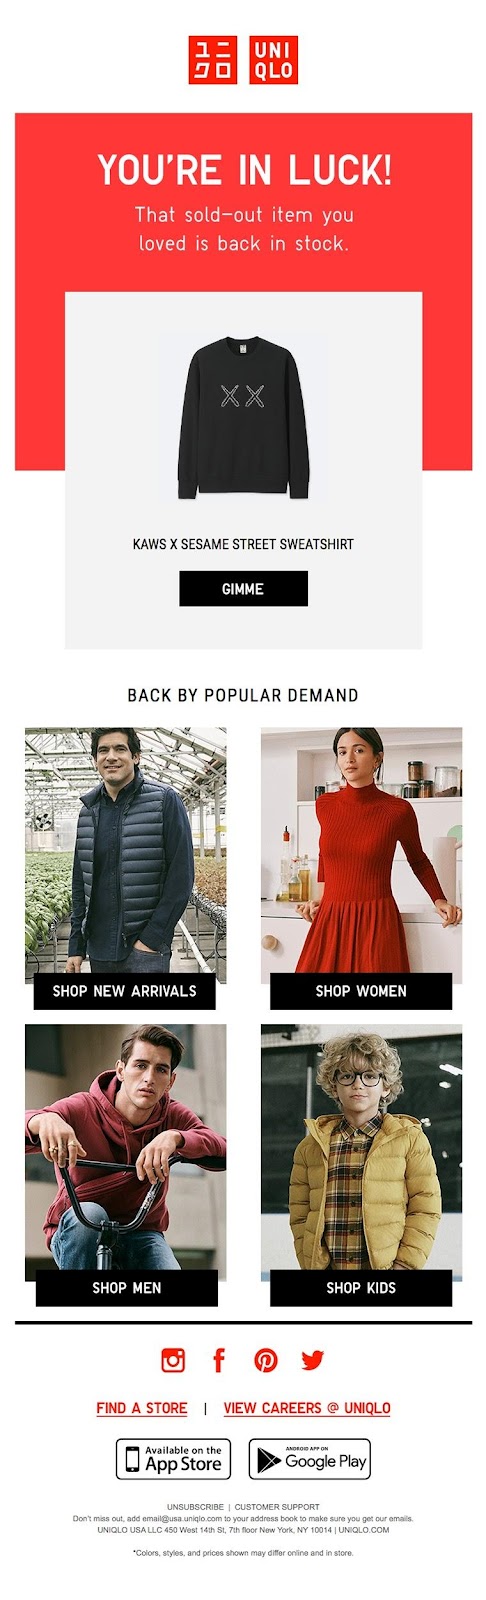 Uniqlo email example